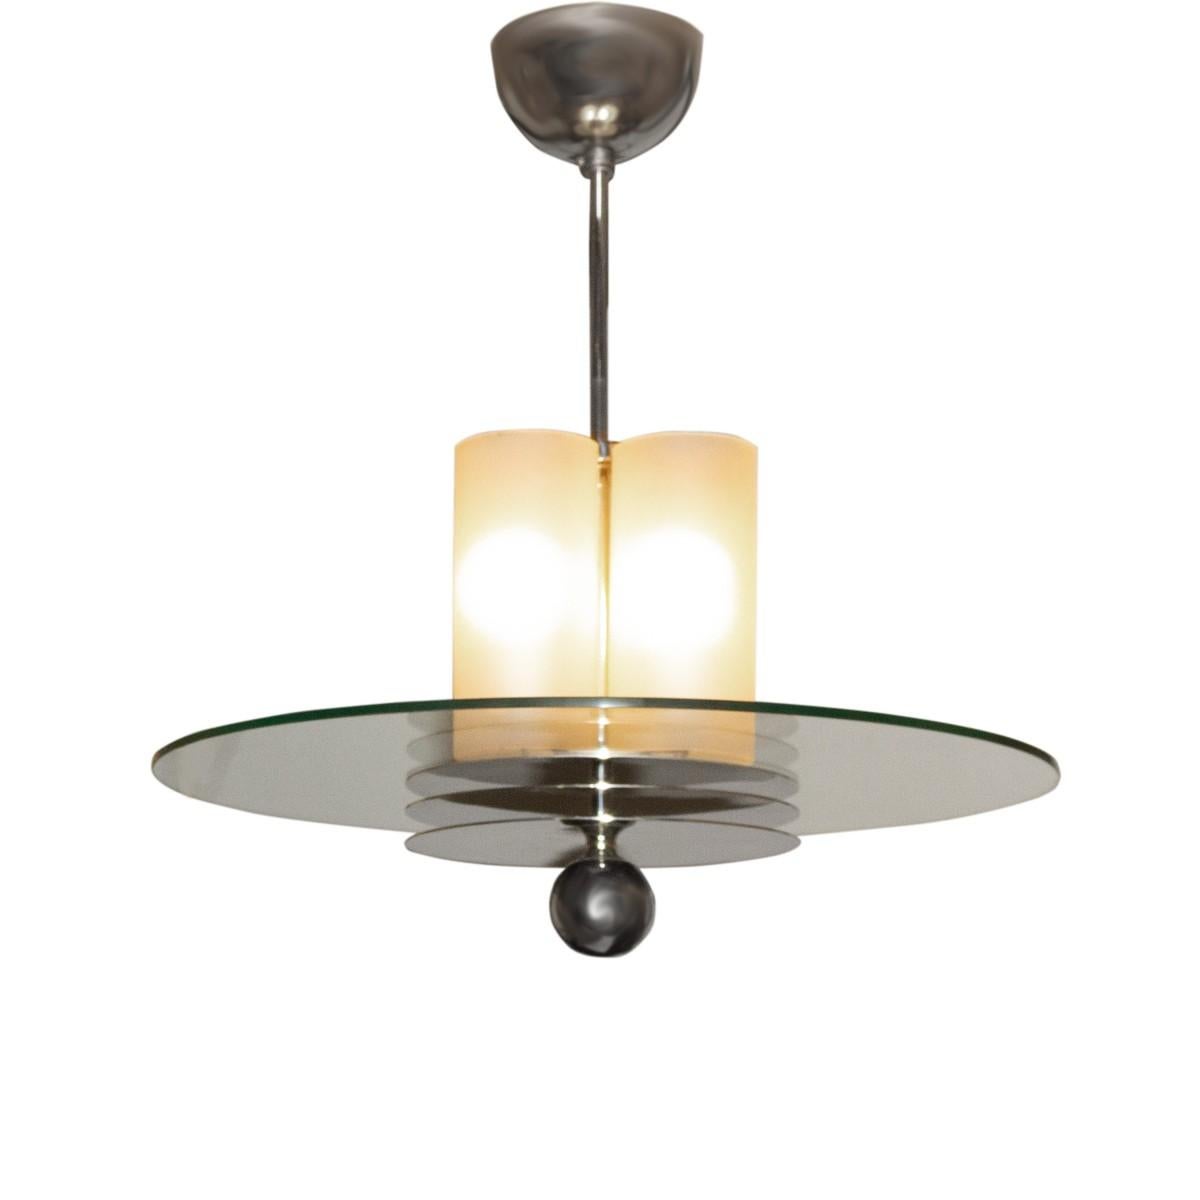 An Art Deco period pendant light fixture. Features a center round glass piece suspended from a burnished nickel stem with matching ceiling canopy. Complemented by a lighted frosted glass shade and a burnished nickel ball. France, circa